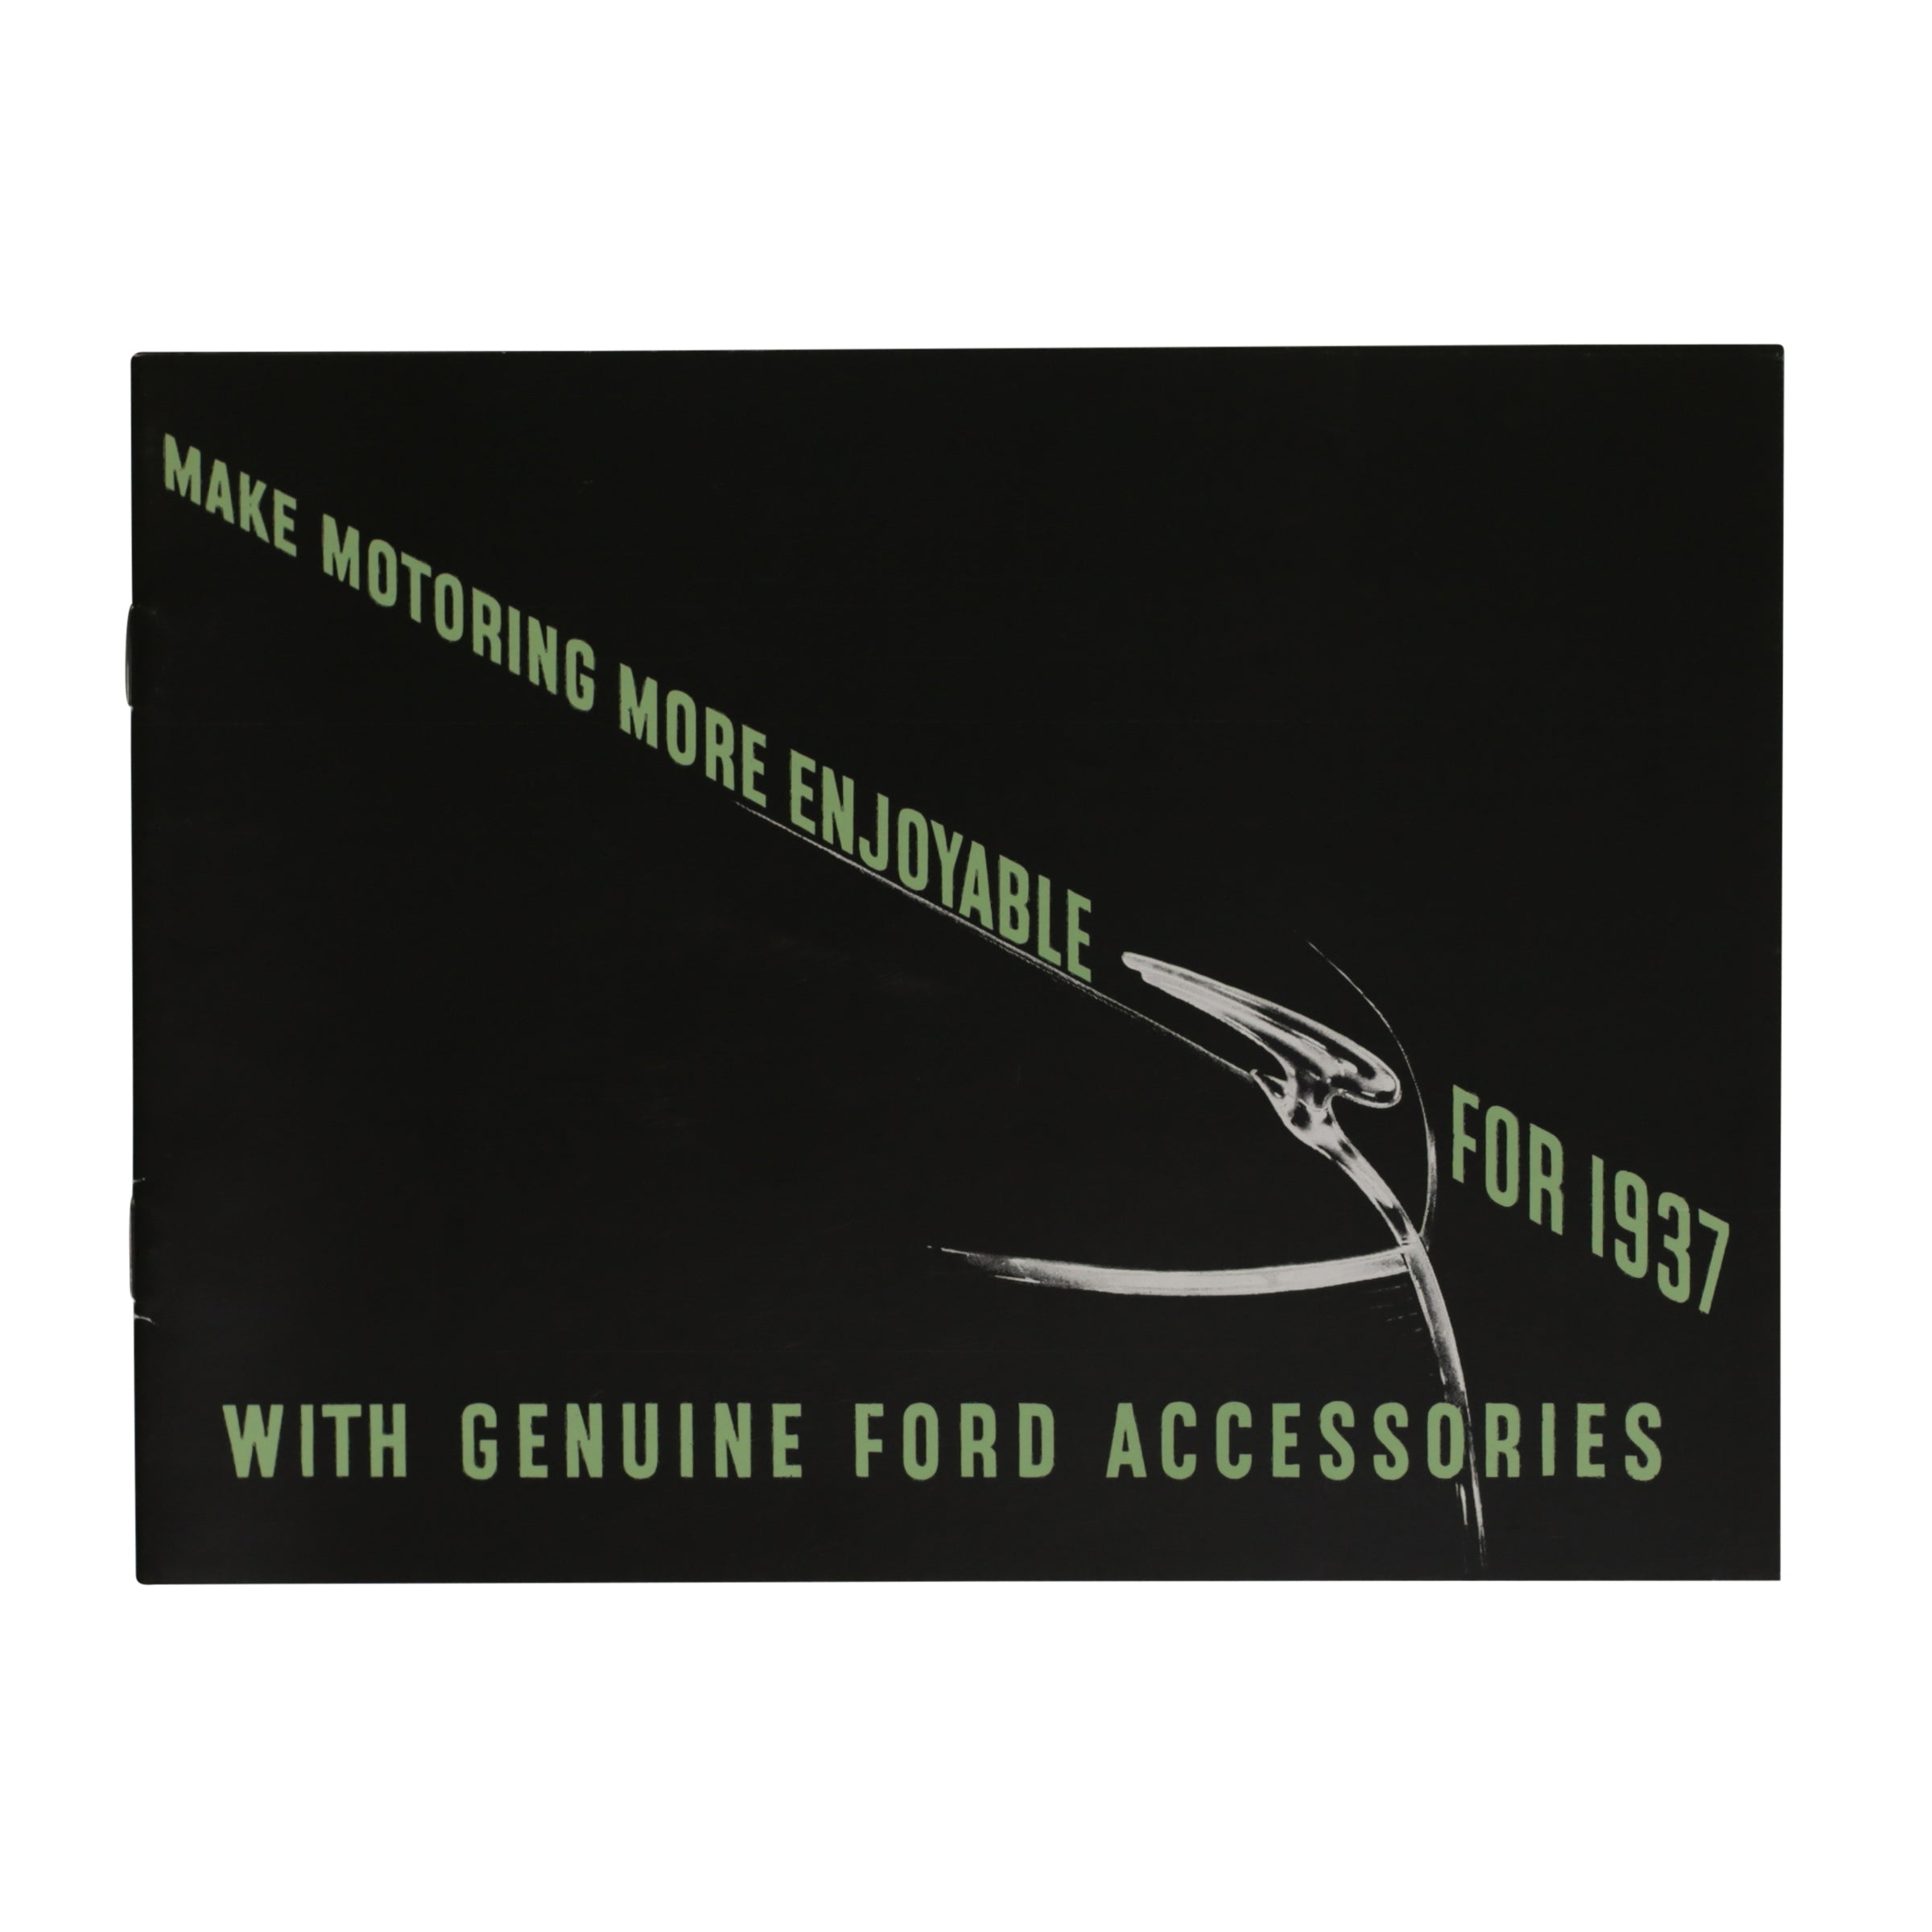 Accessories Brochure  • 1937 Ford